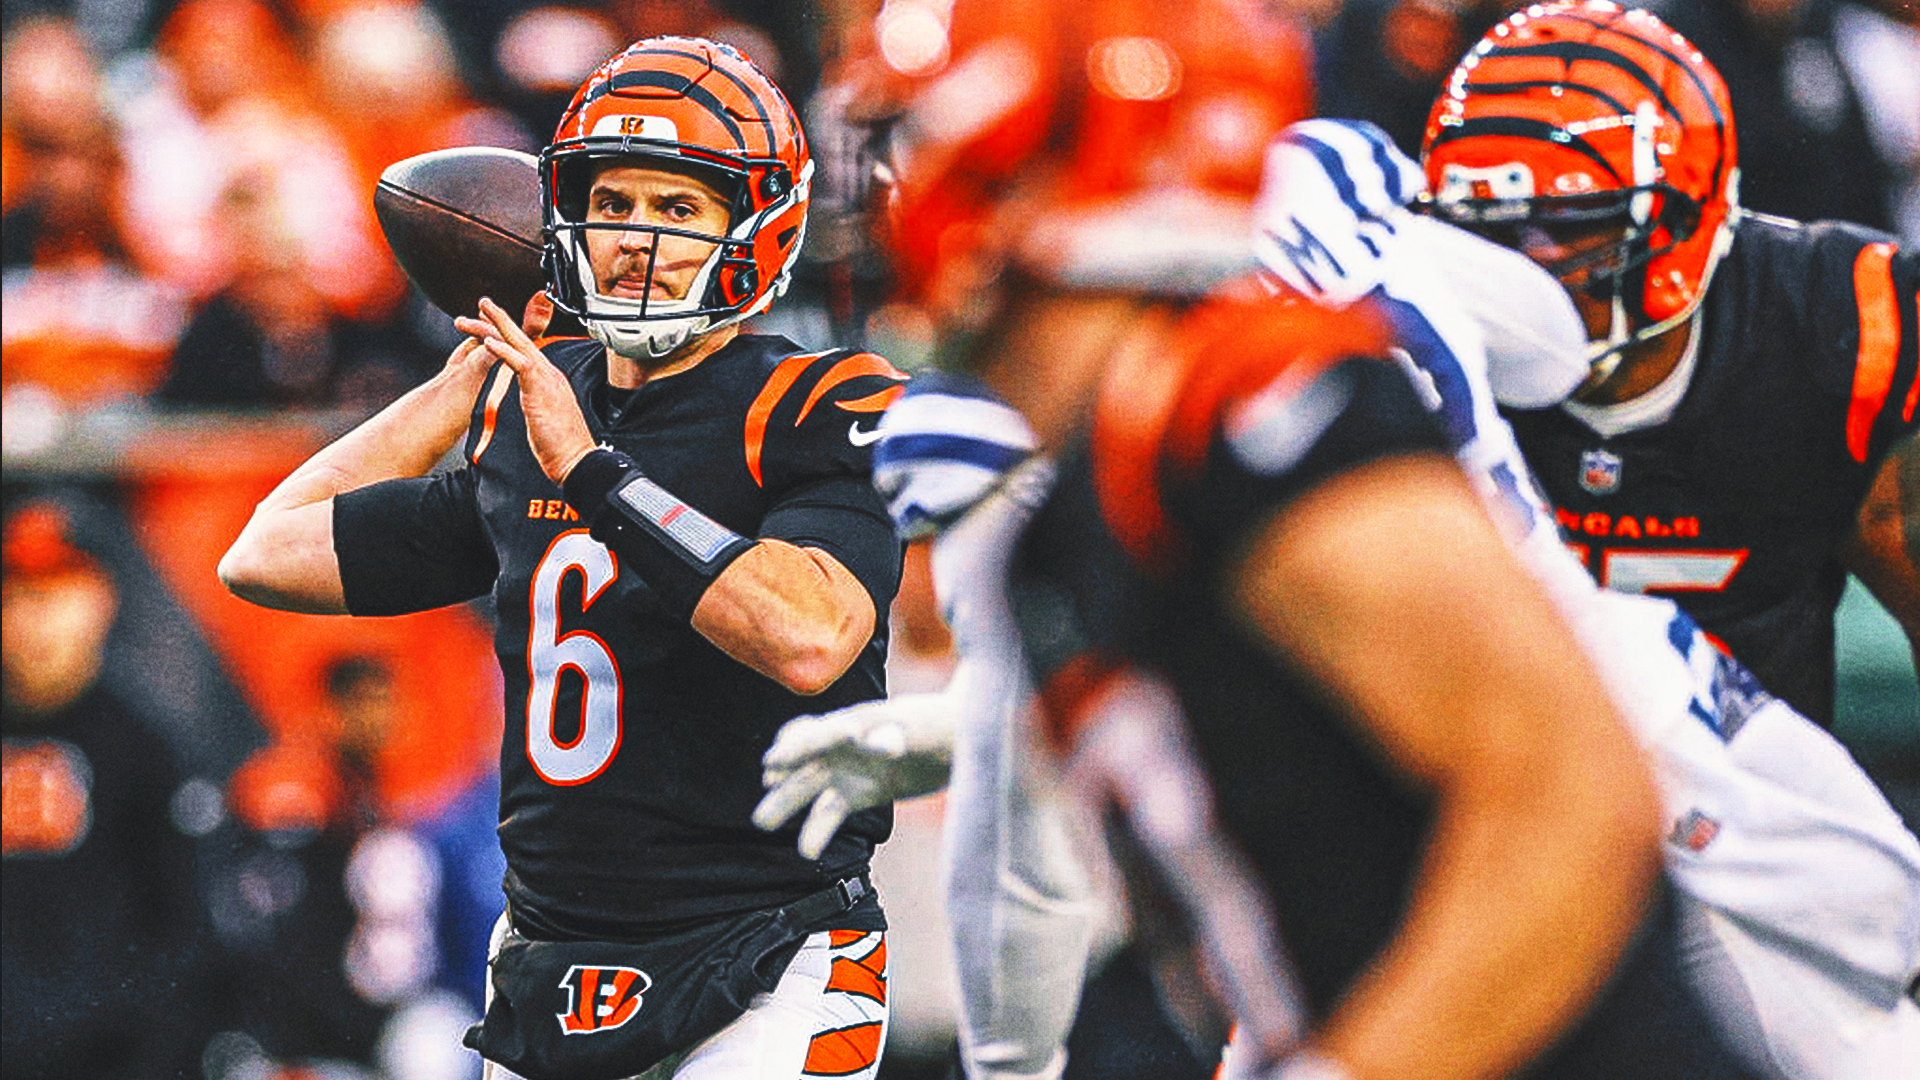 Jake Browning shines again, leads Bengals to 34-14 win over Colts